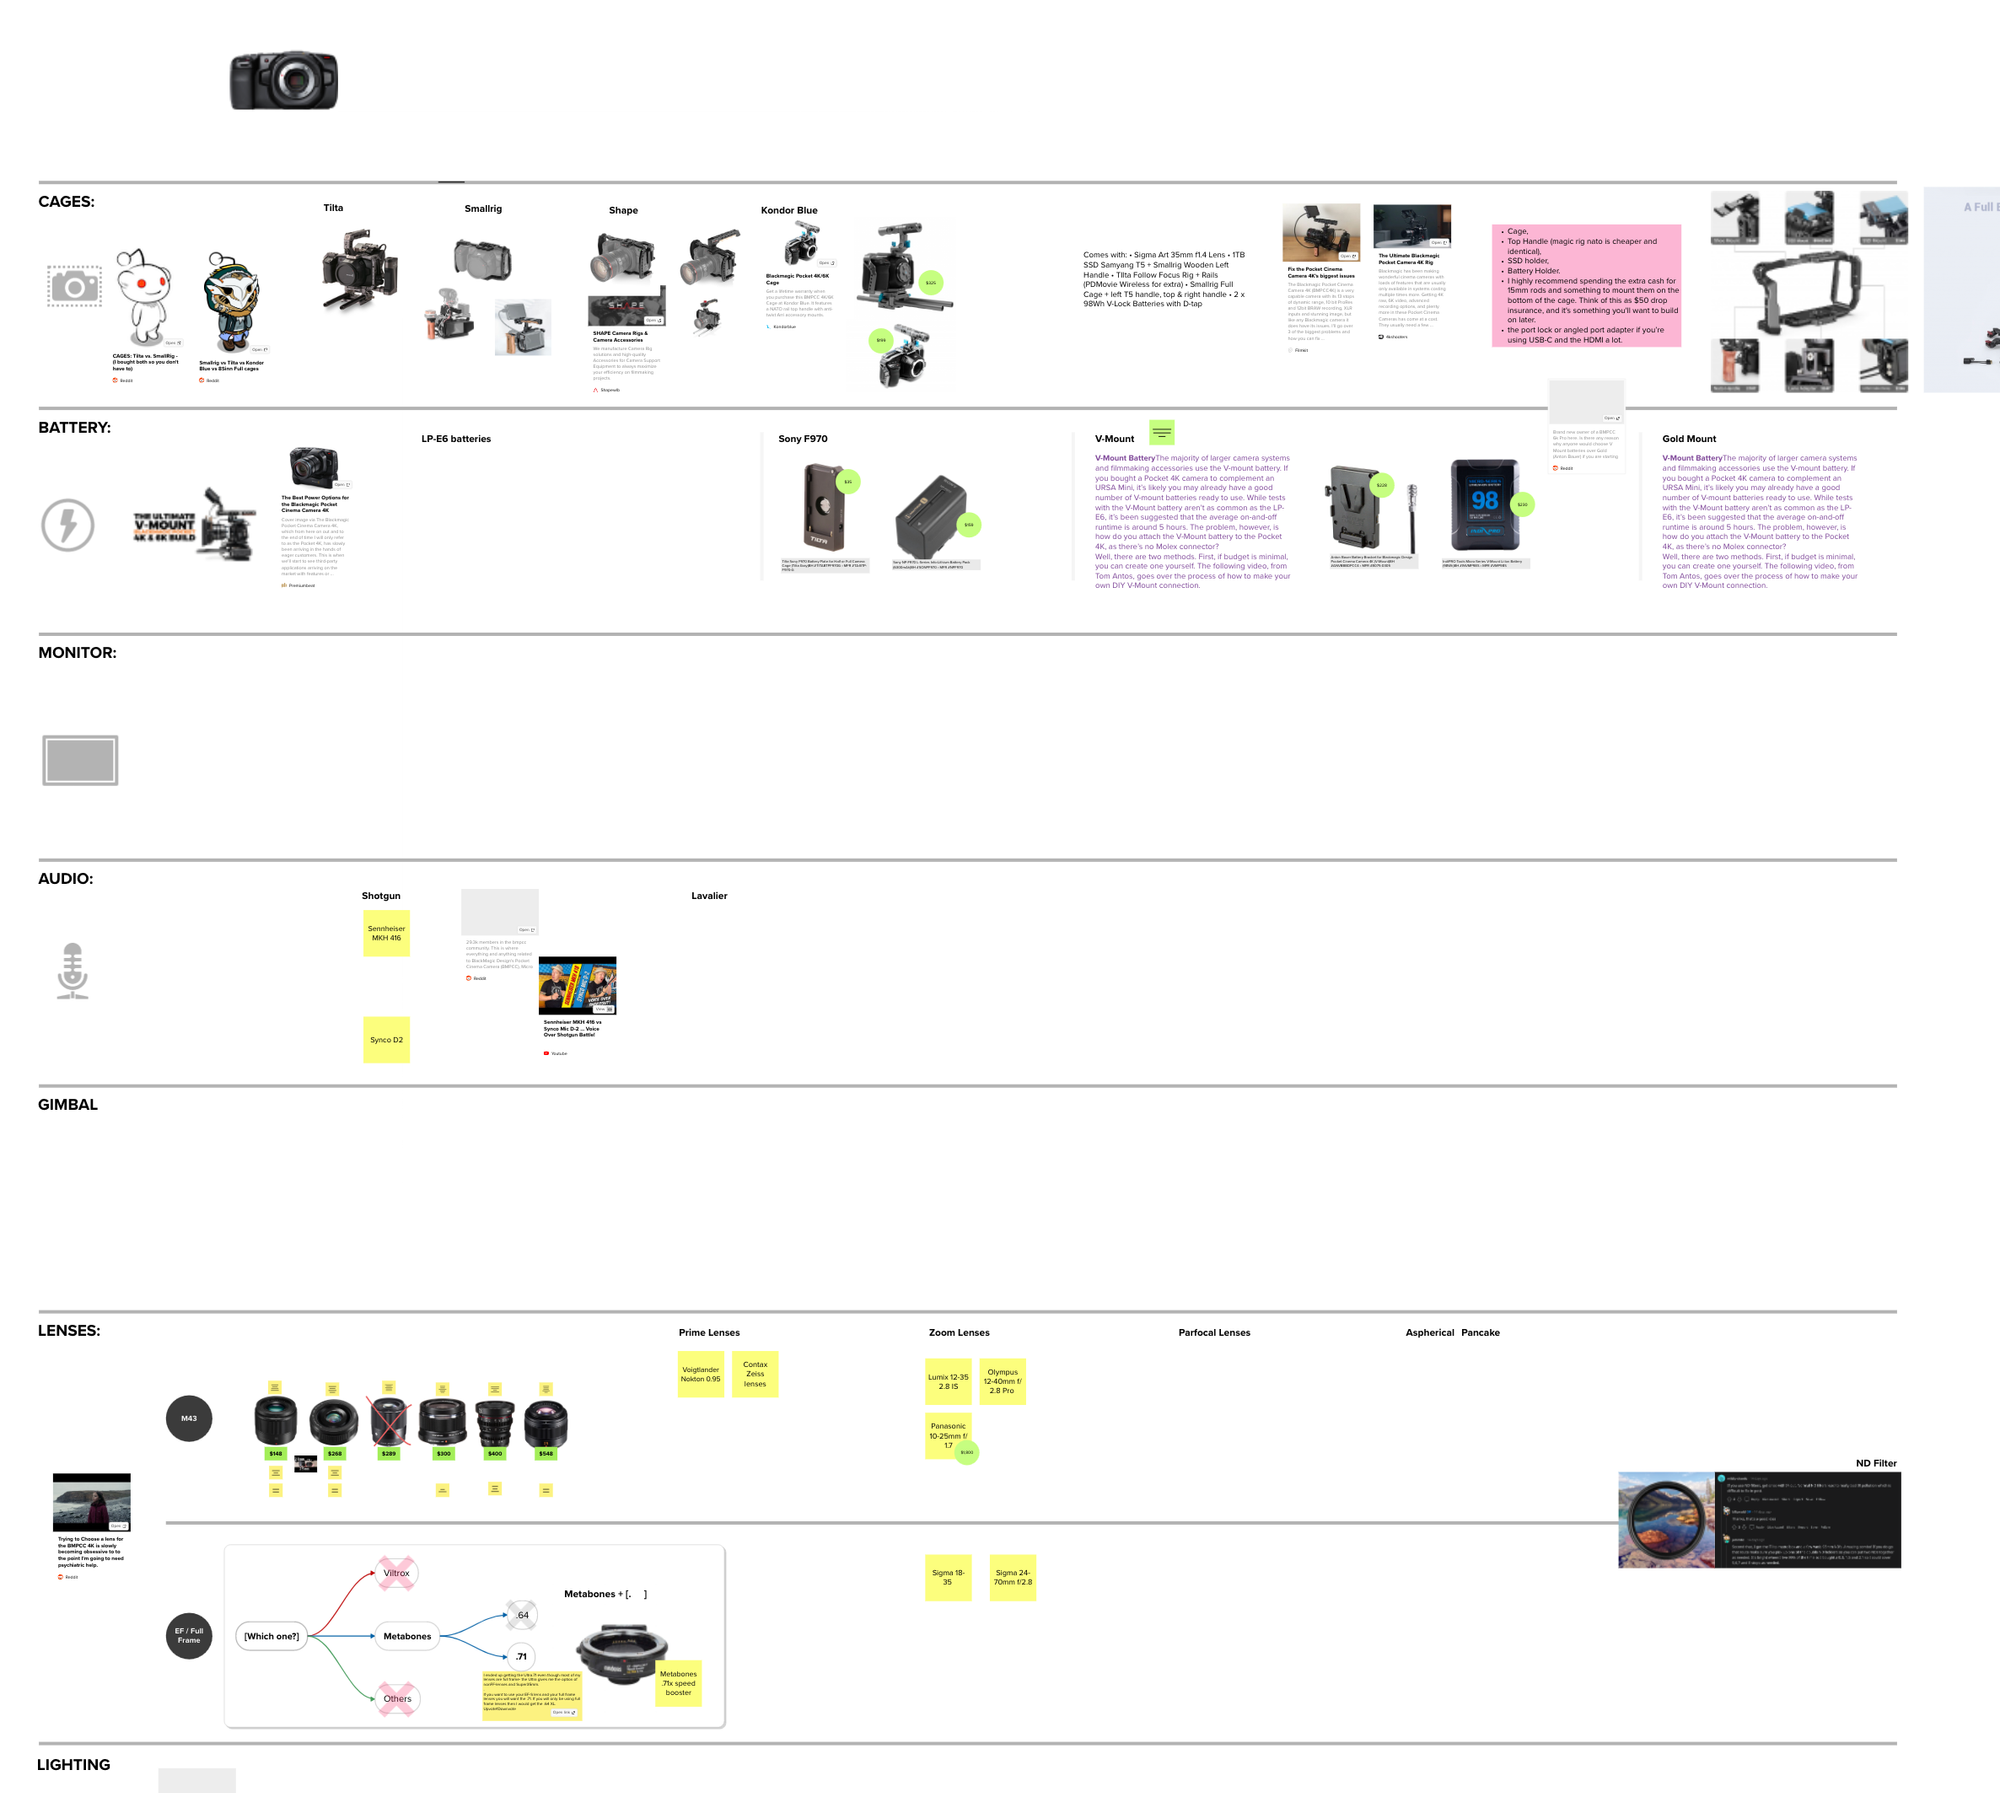 Screenshot of a Mural board where the author is trying to organize and make sense of various video camera accessories..